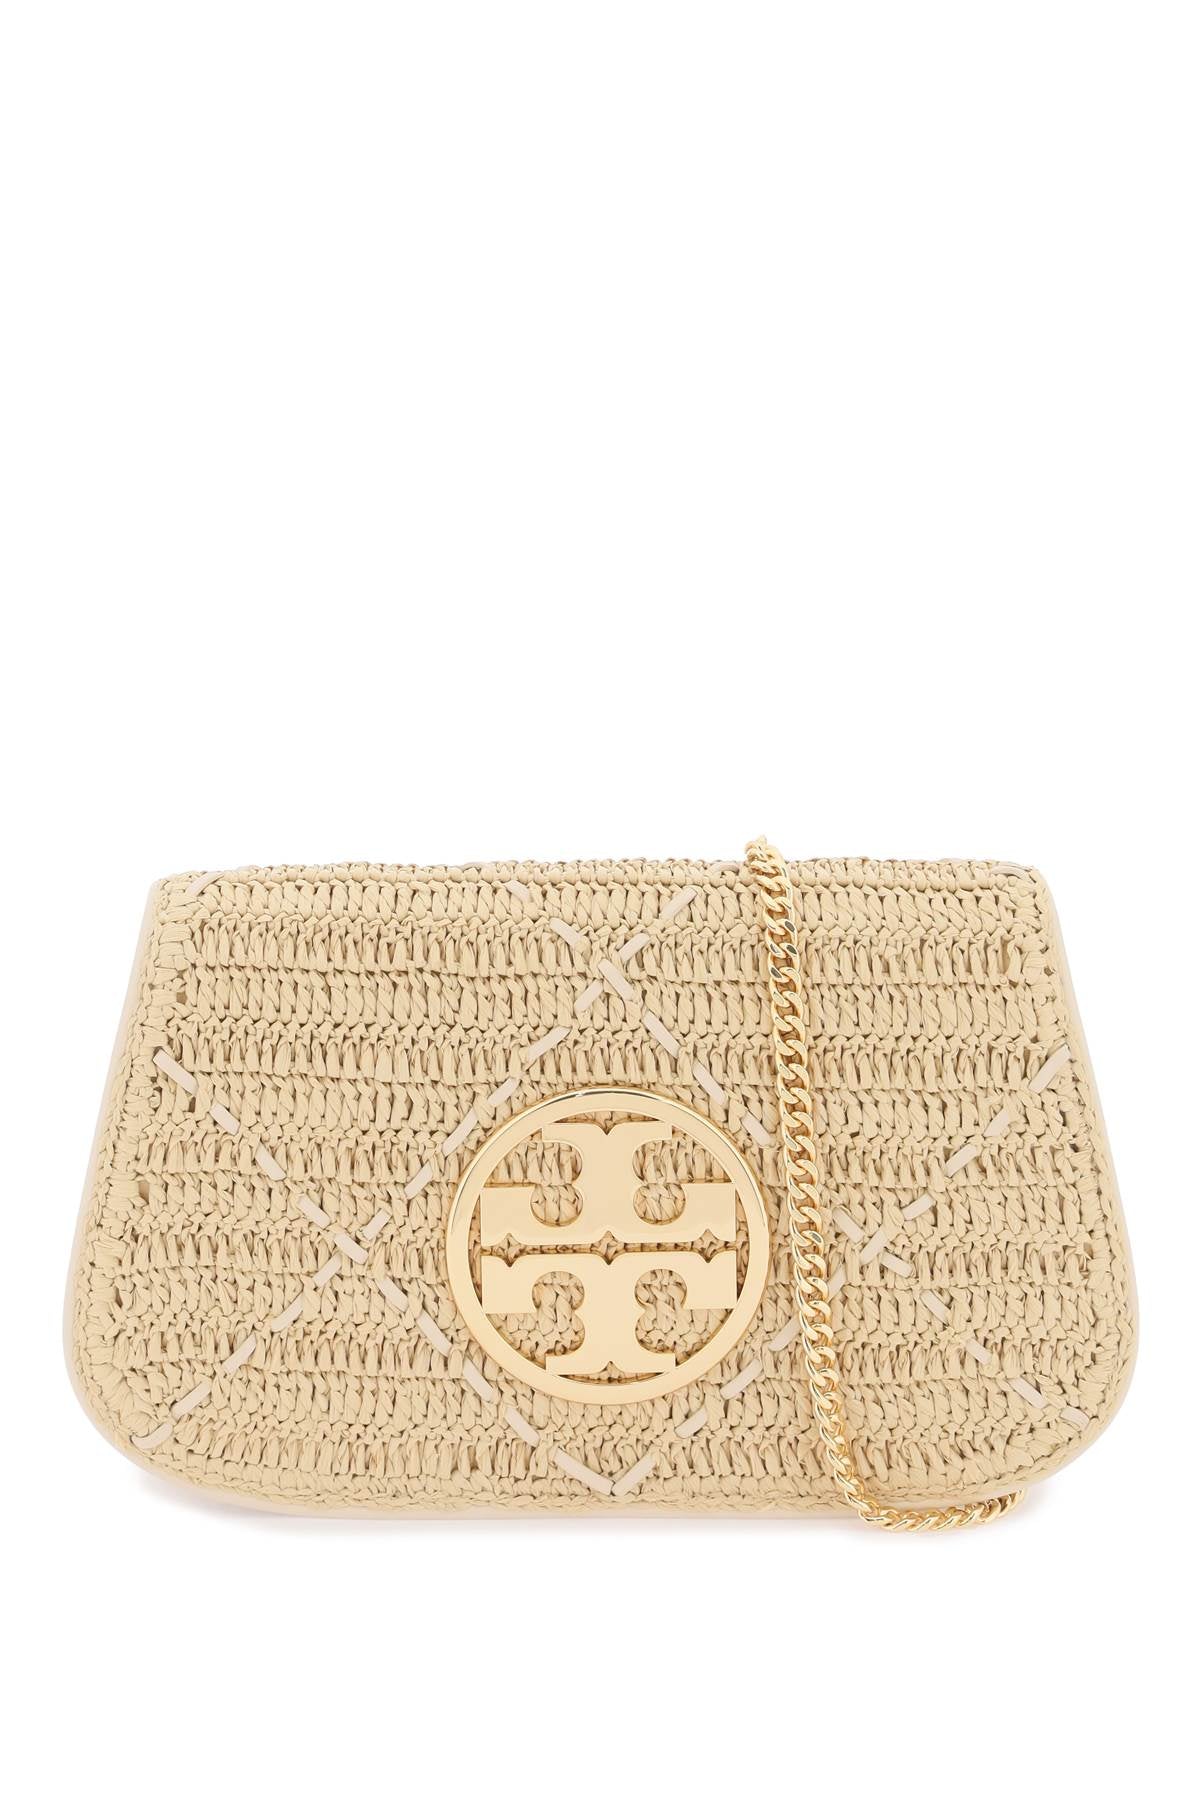 Tory Burch Replace With Double Quotereva Raffia   Beige